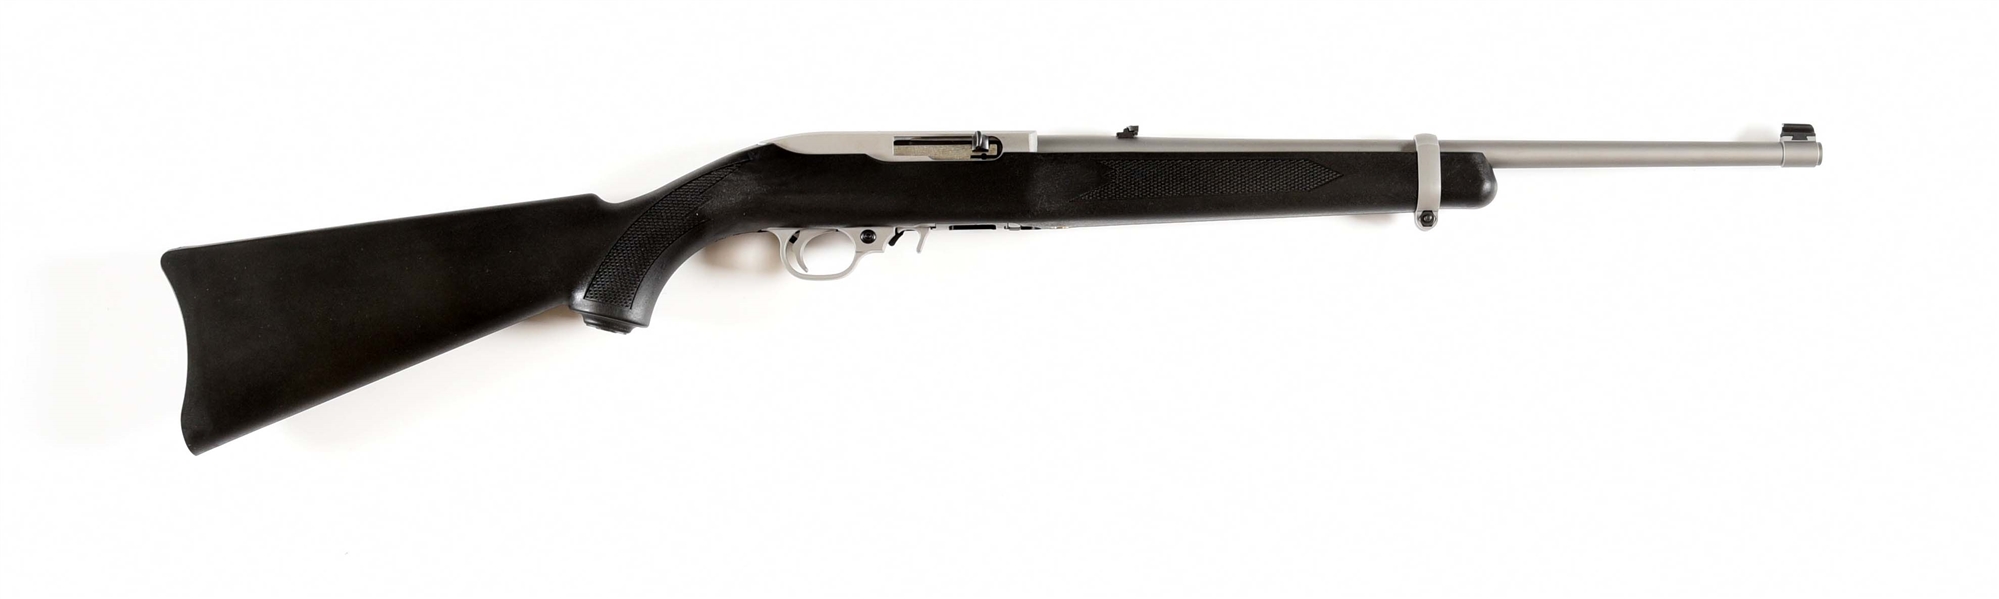 (M) RUGER 10/22 SEMI-AUTOMATIC RIFLE WITH FACTORY BOX